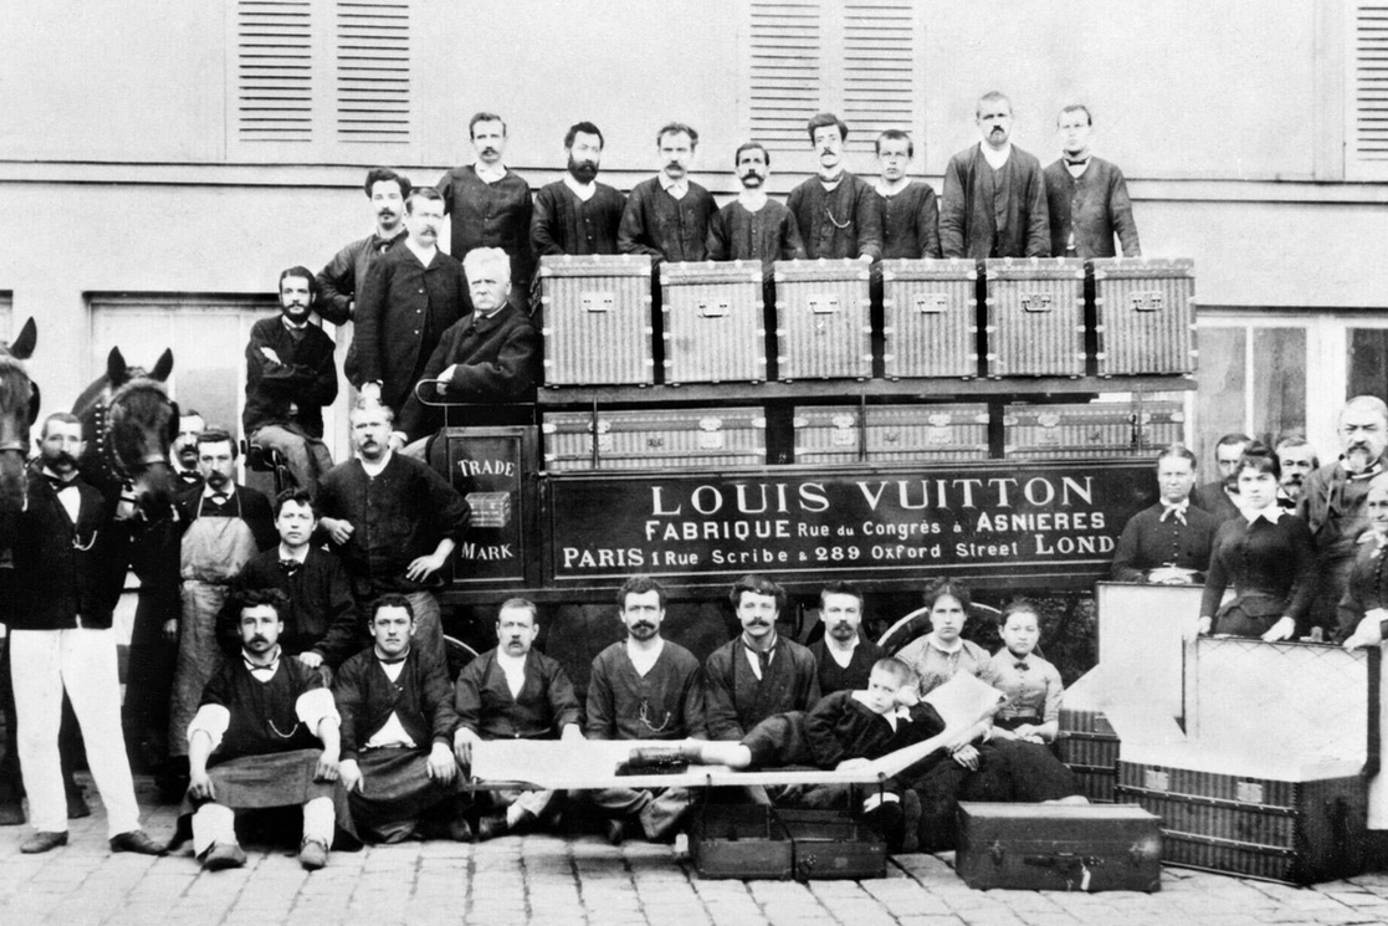 Louis Vuitton Celebrates 200 years with 200 Trunks, 200